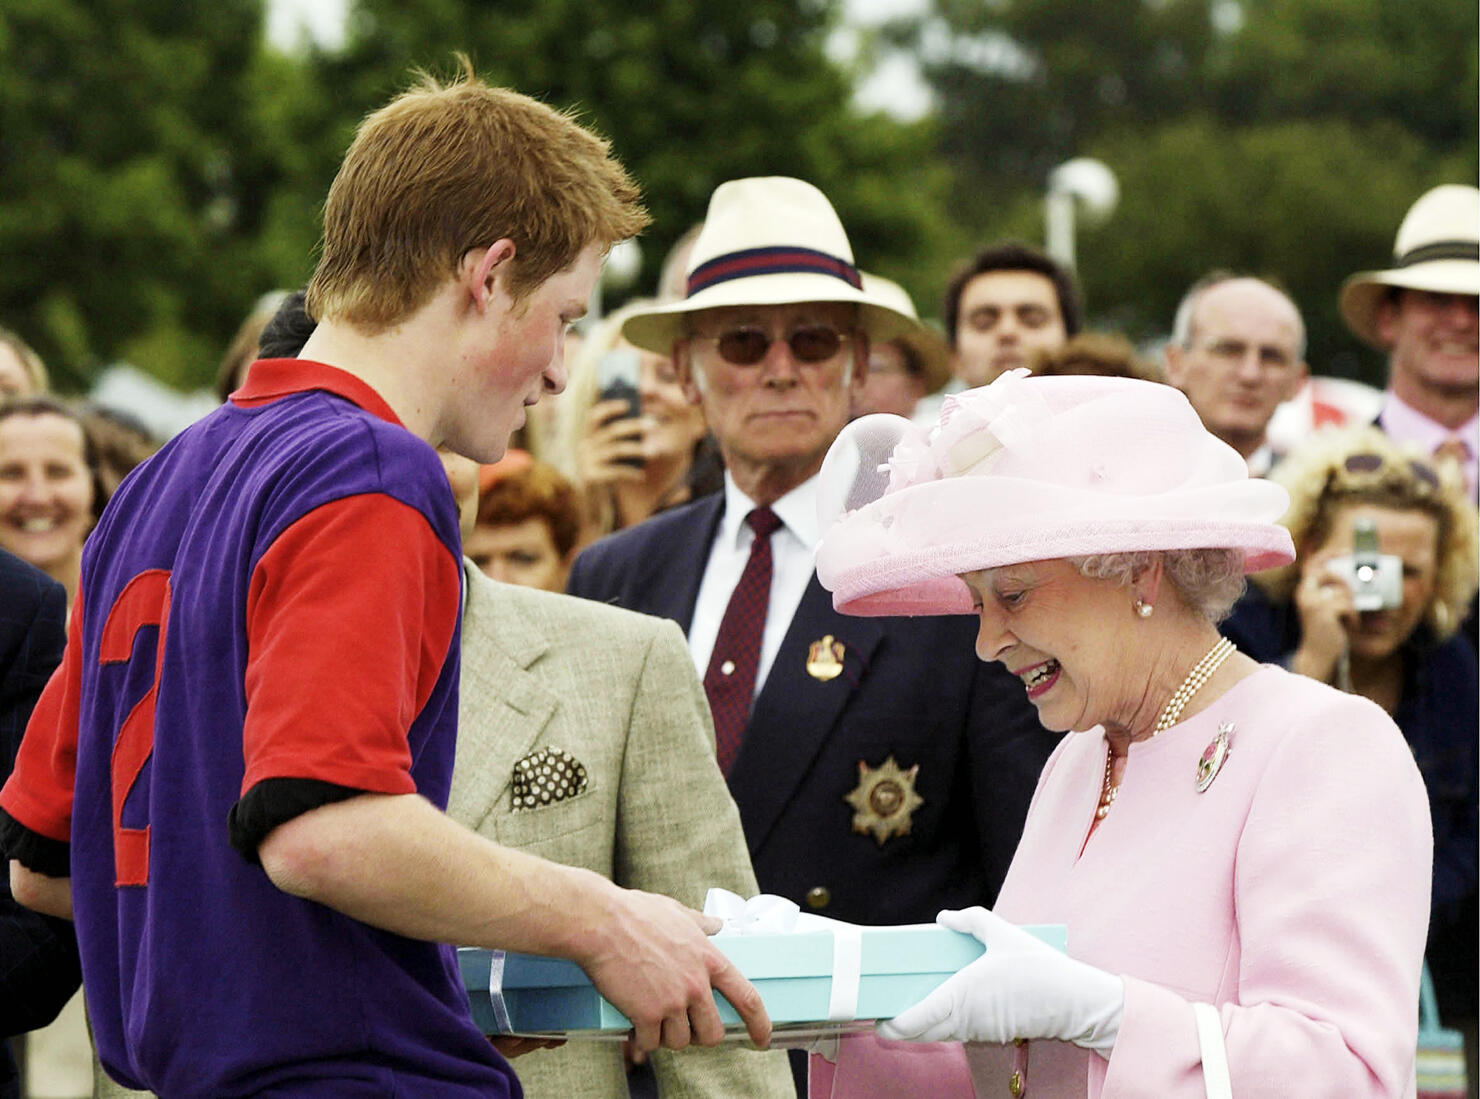 GBR: Queen Elizabeth II makes a presentation to Prince Harry at Royal Ascot